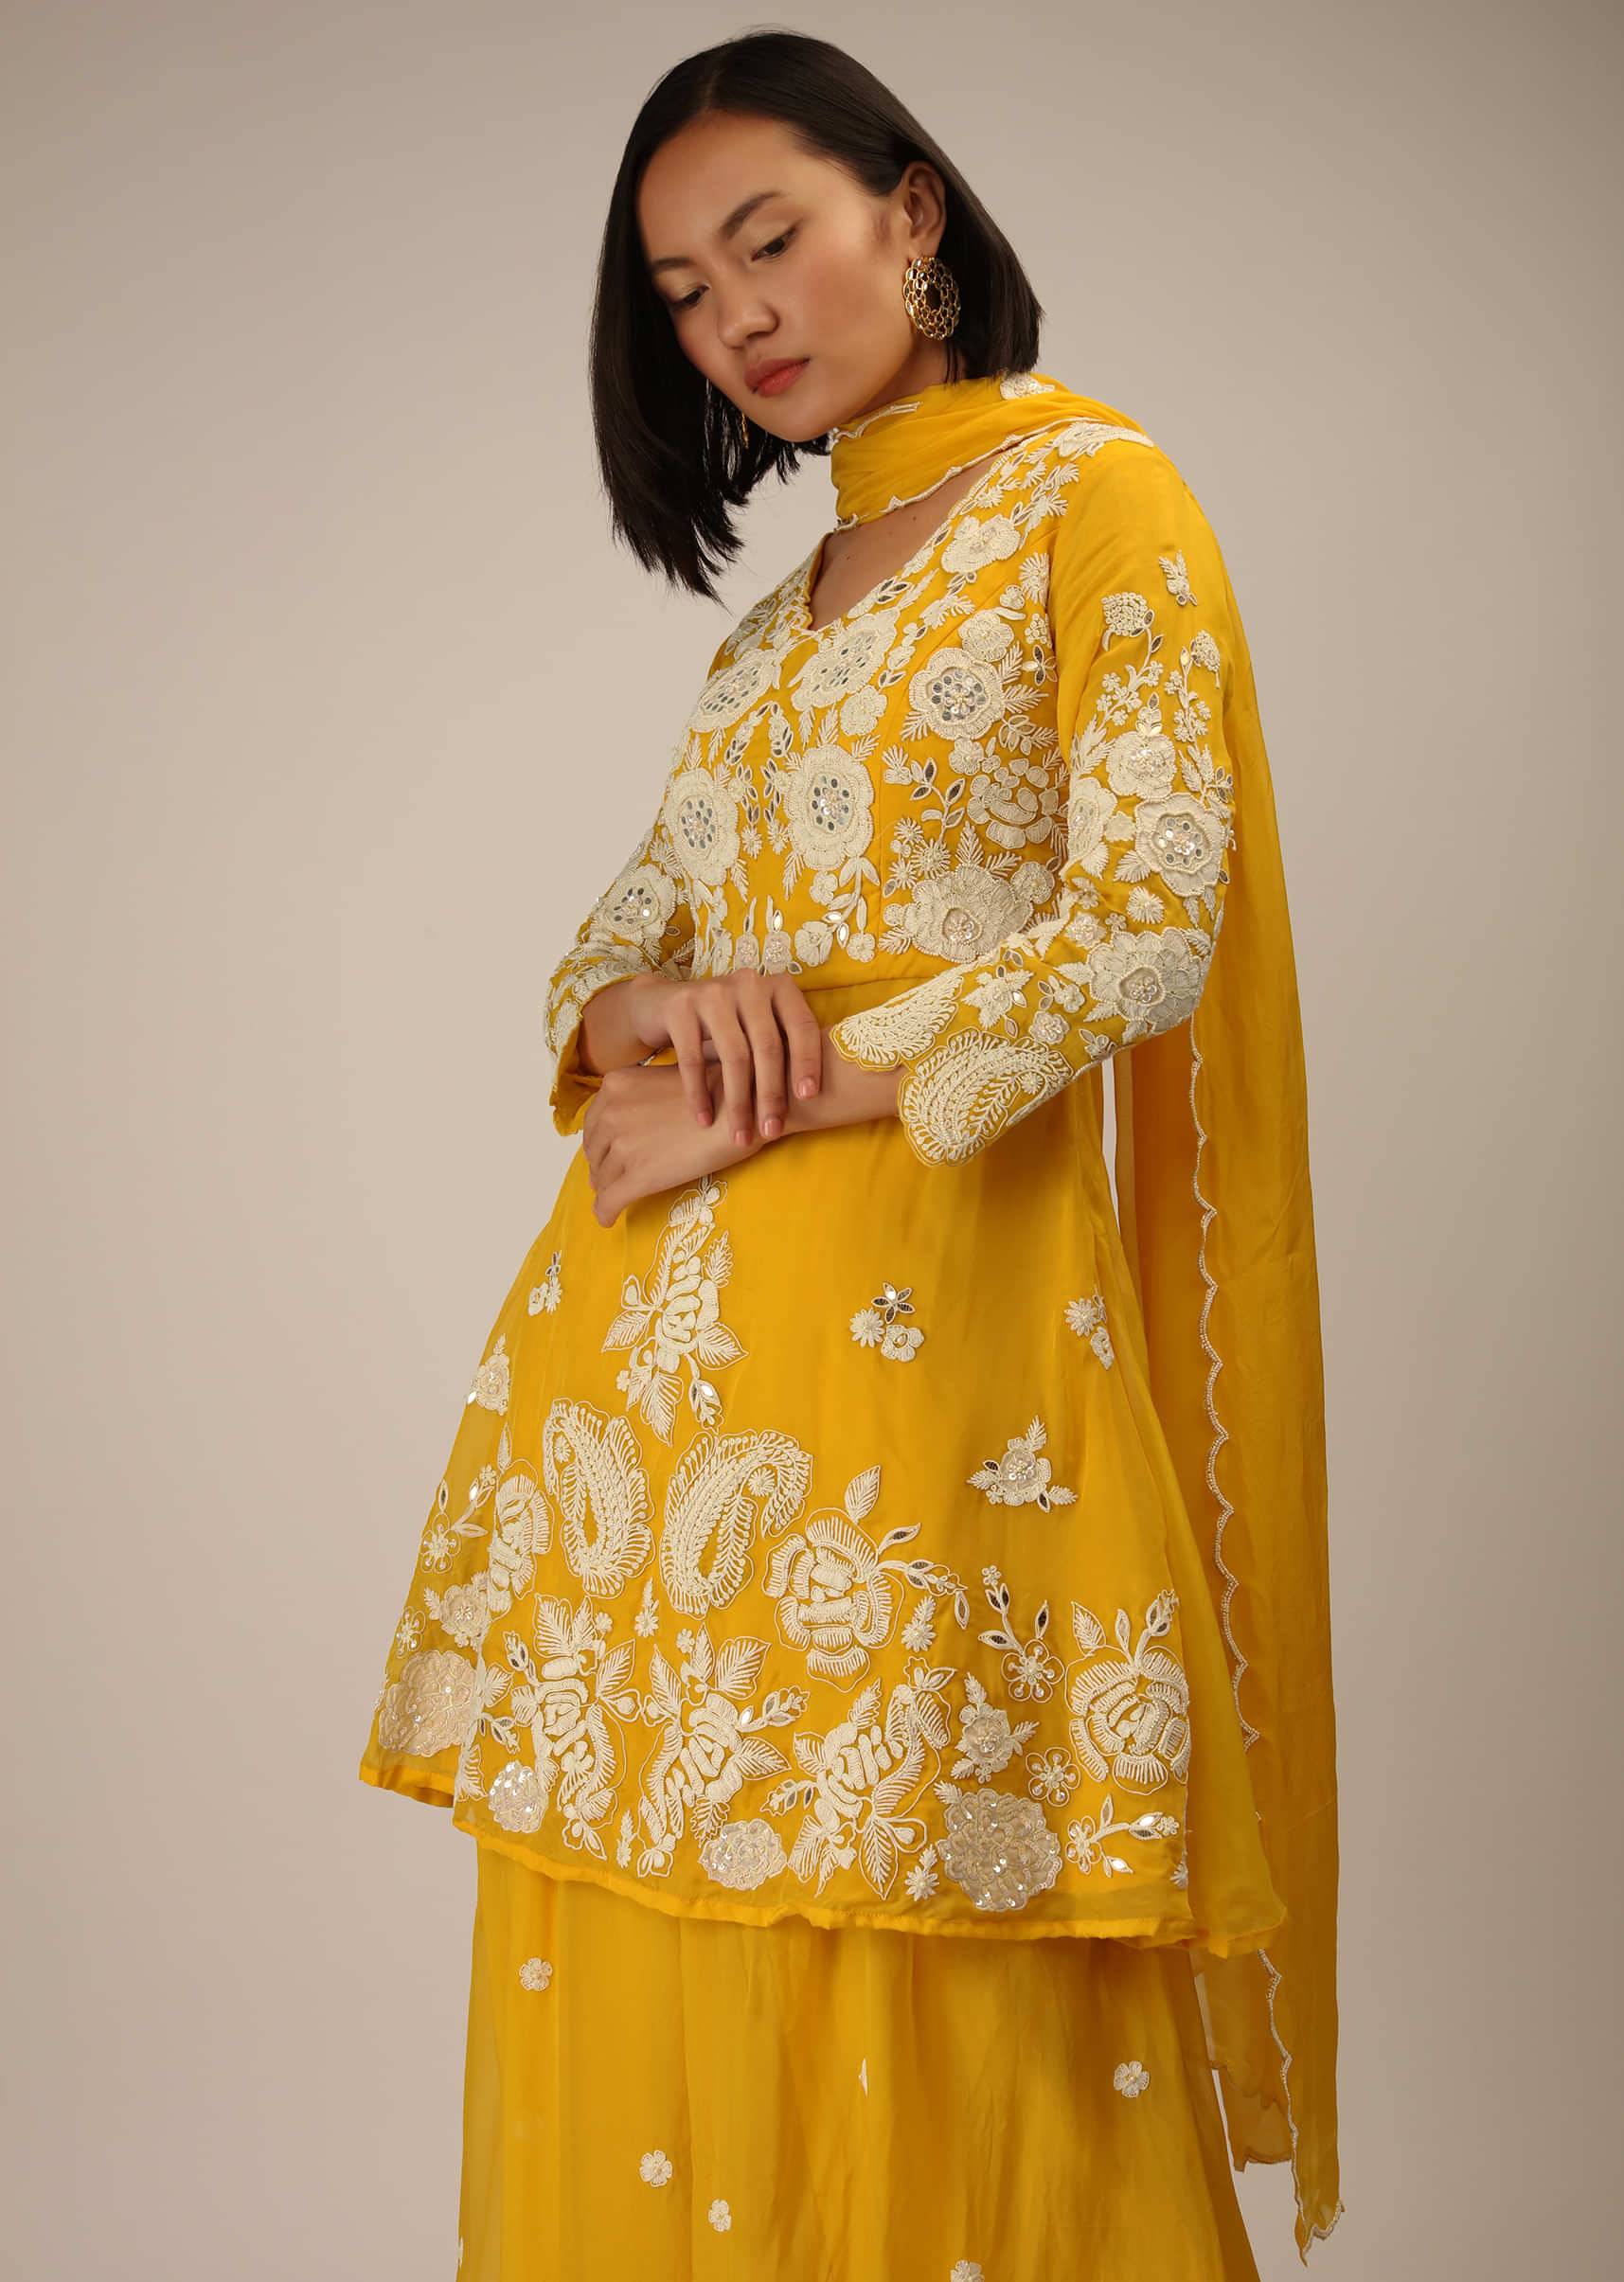 Chrome Yellow A Line Palazzo Suit In Organza Silk With Thread, Moti And Mirror Embroidered Floral Motifs